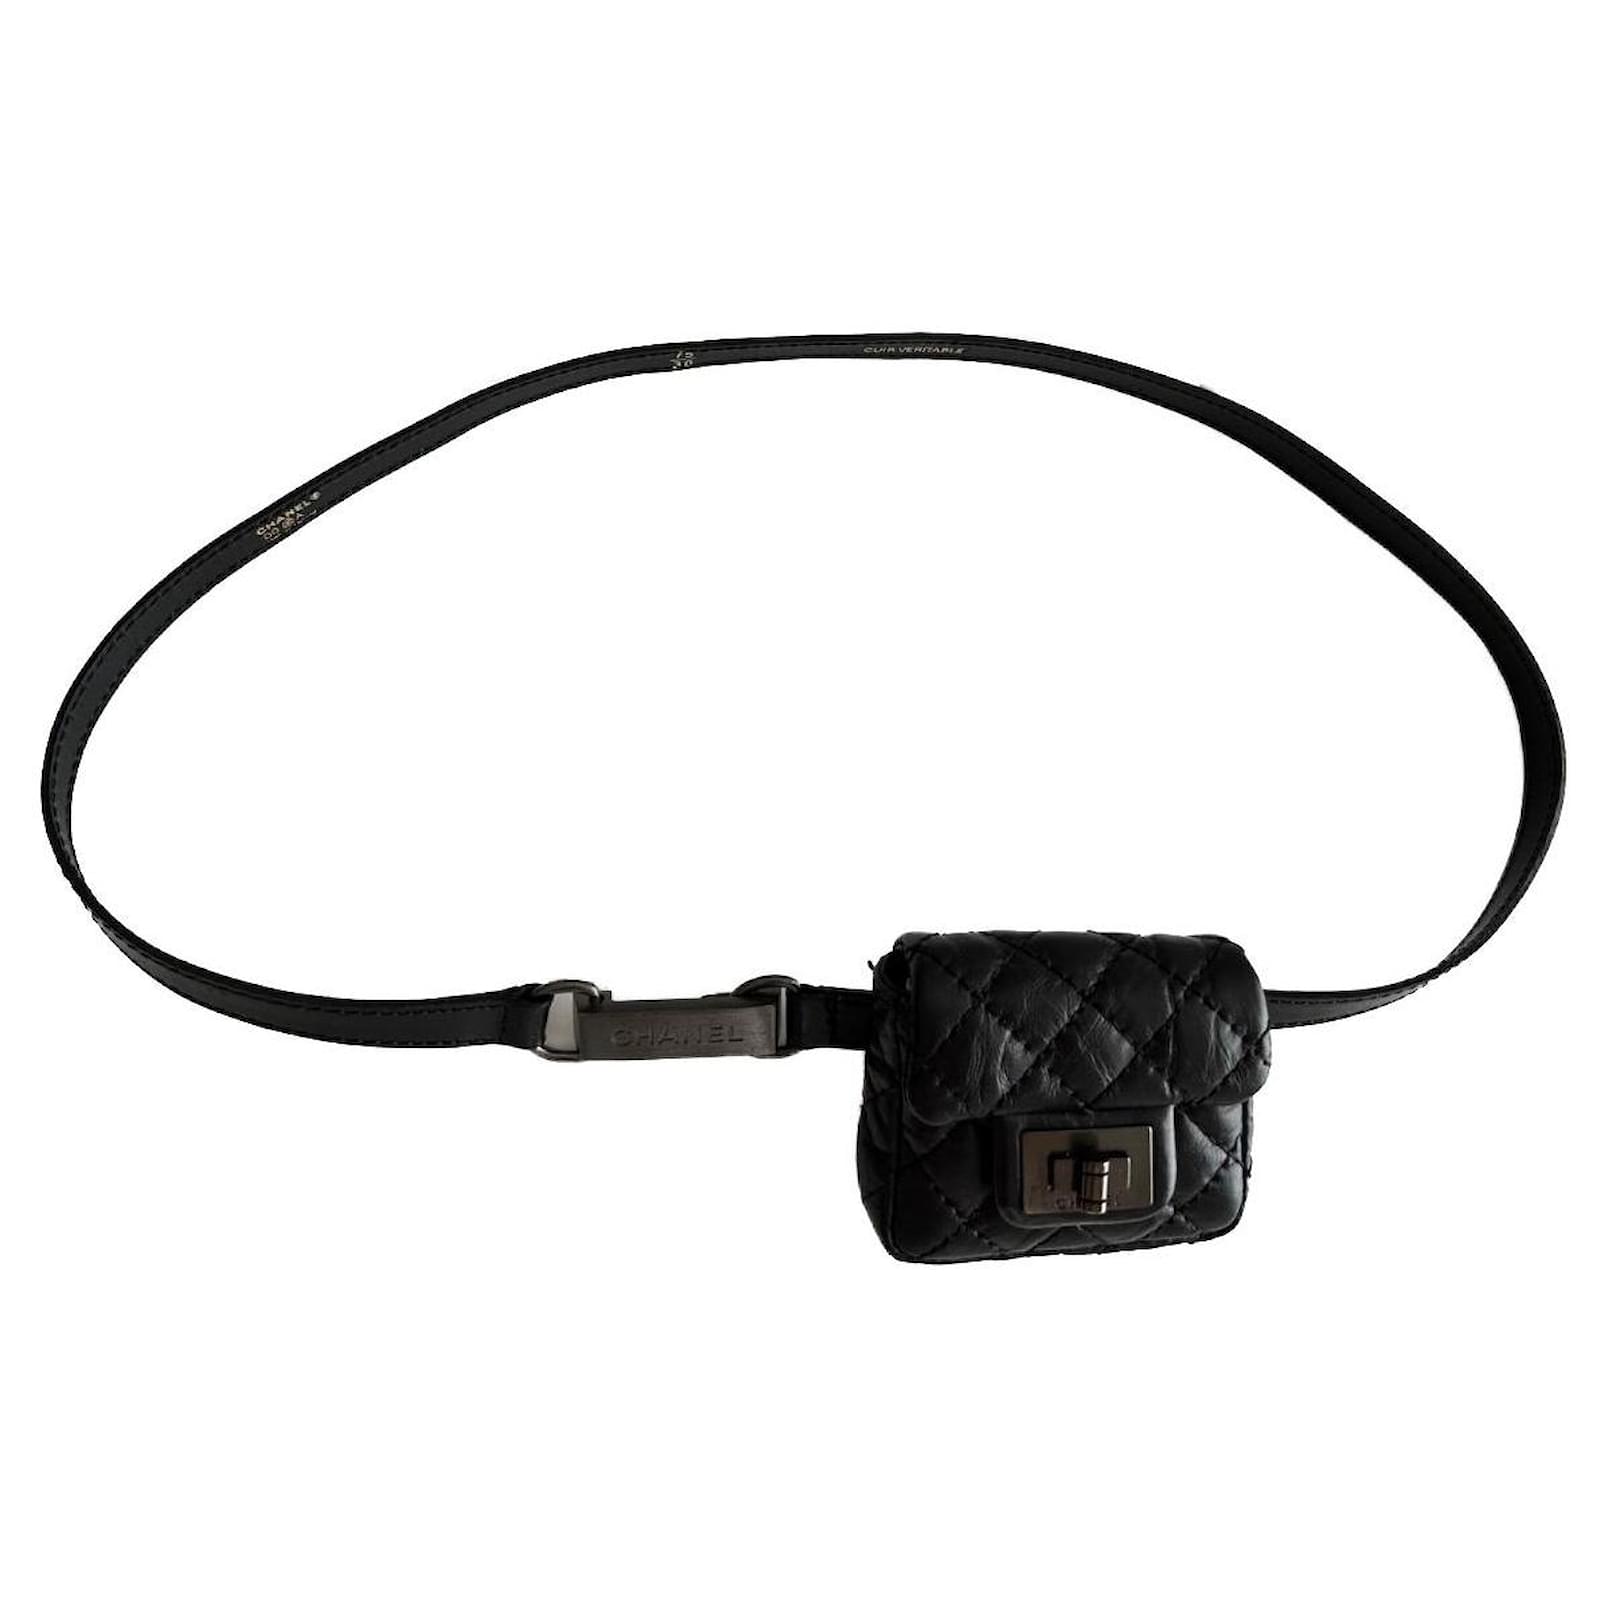 CHANEL, Accessories, Chanel Cc Logo Luxurious Leather Belt